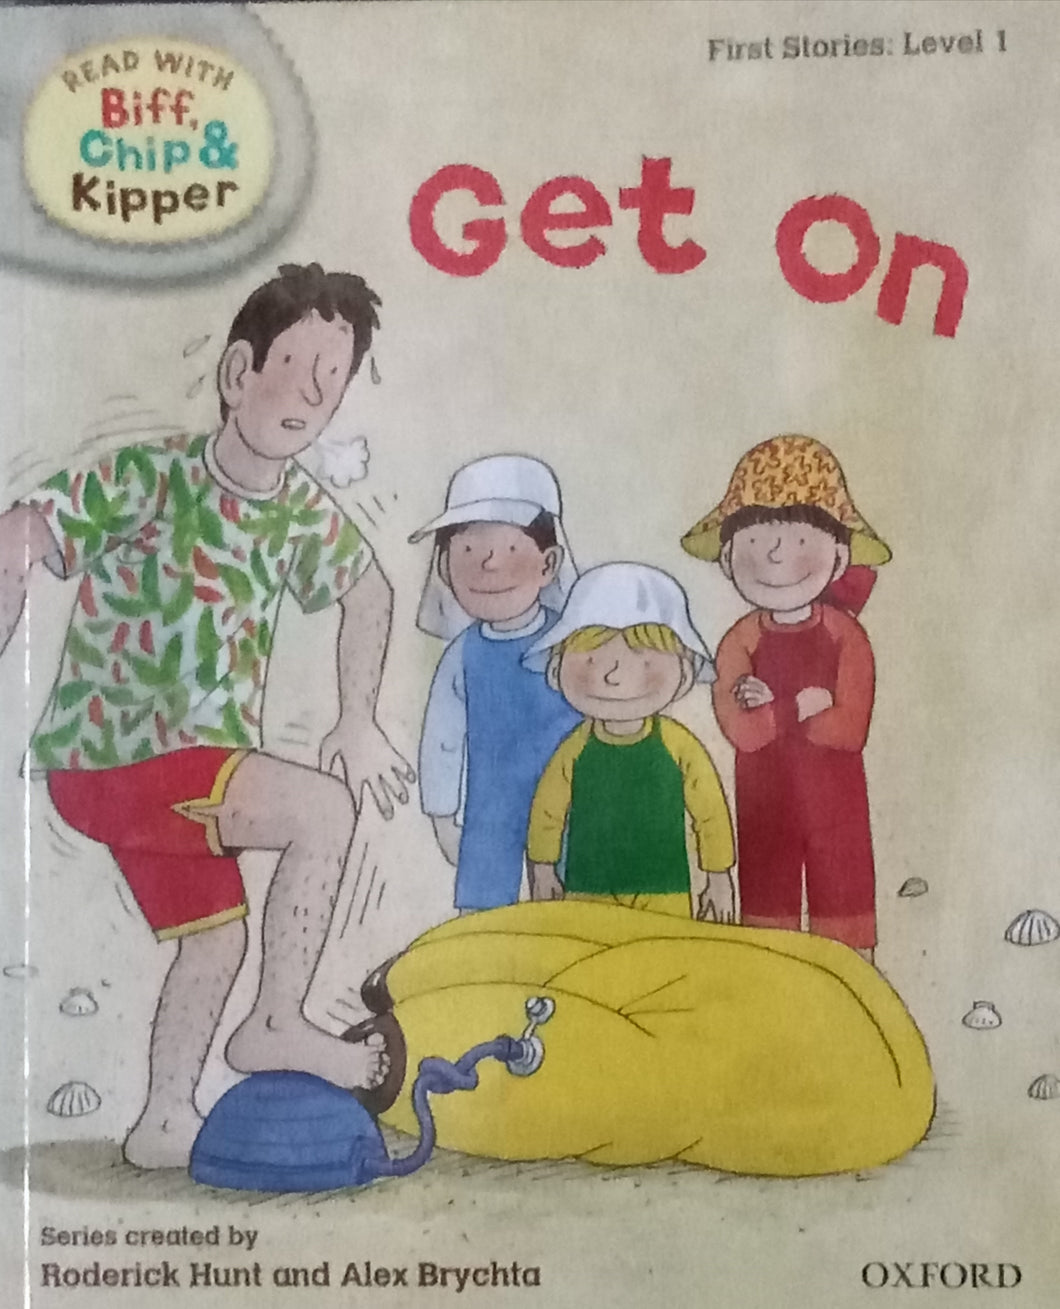 Reading With Biff, Chip and Kipper: Get On